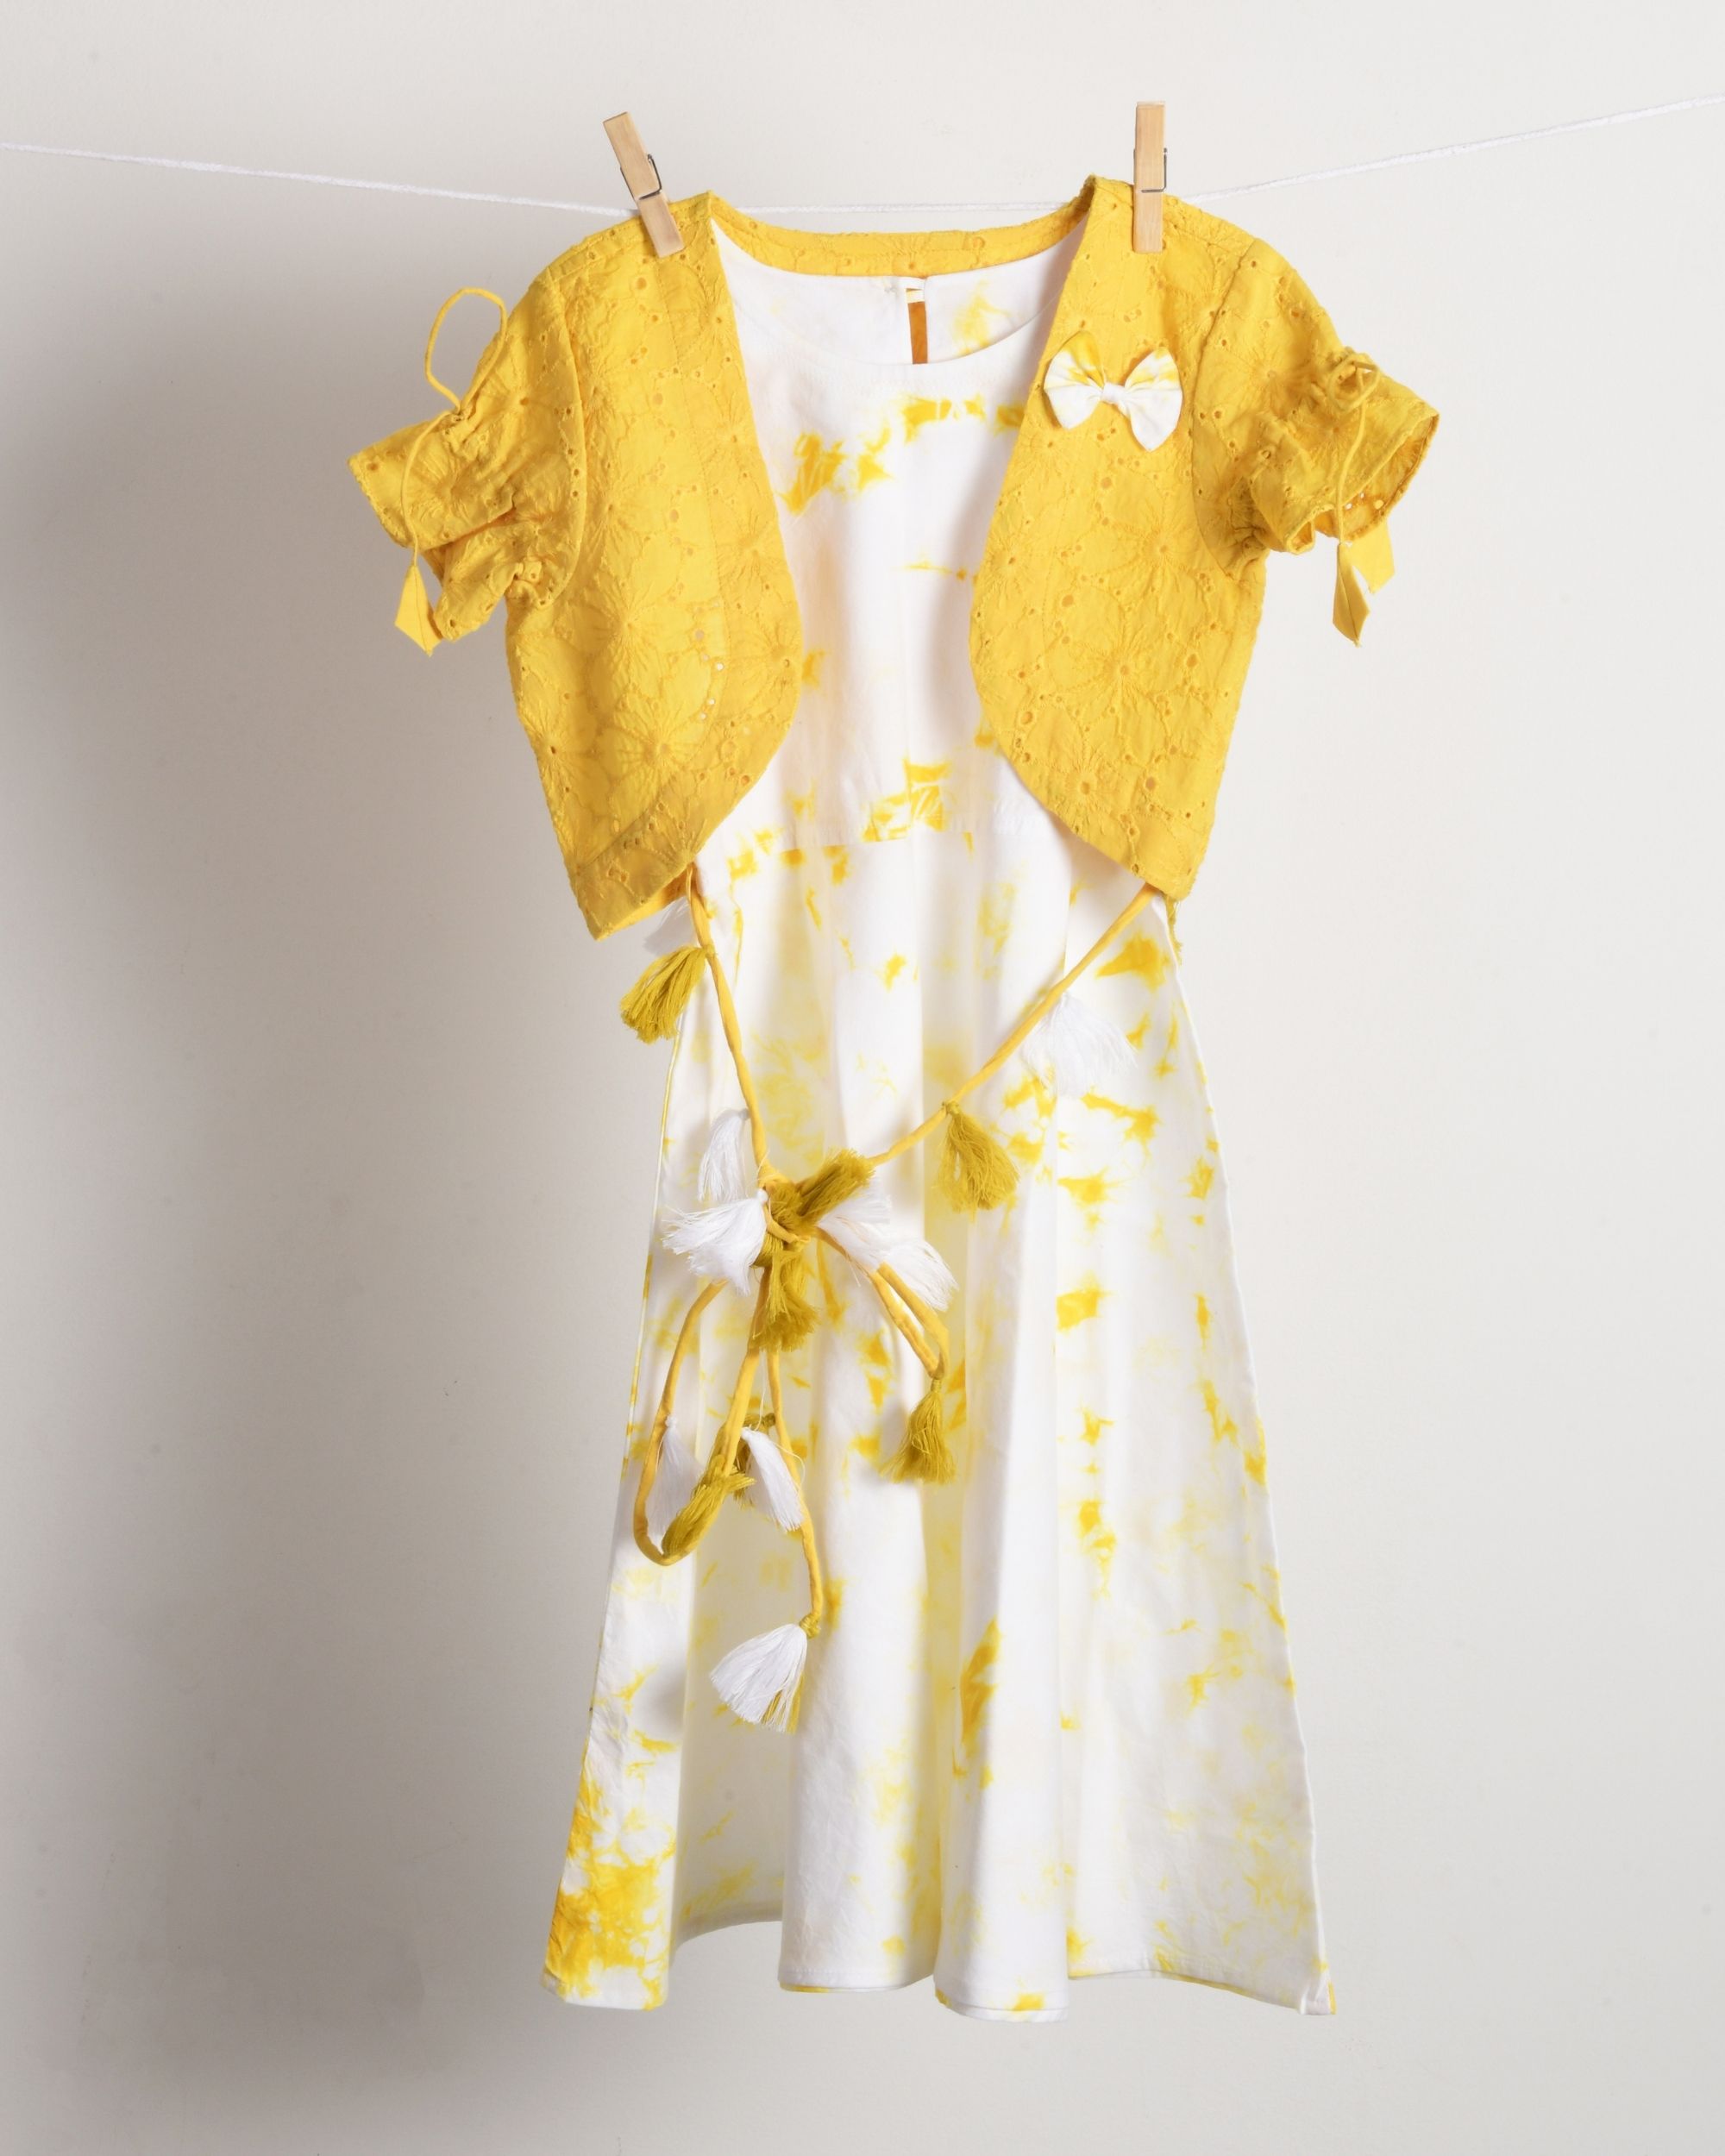 White marble textured dress with yellow jacket - set of two